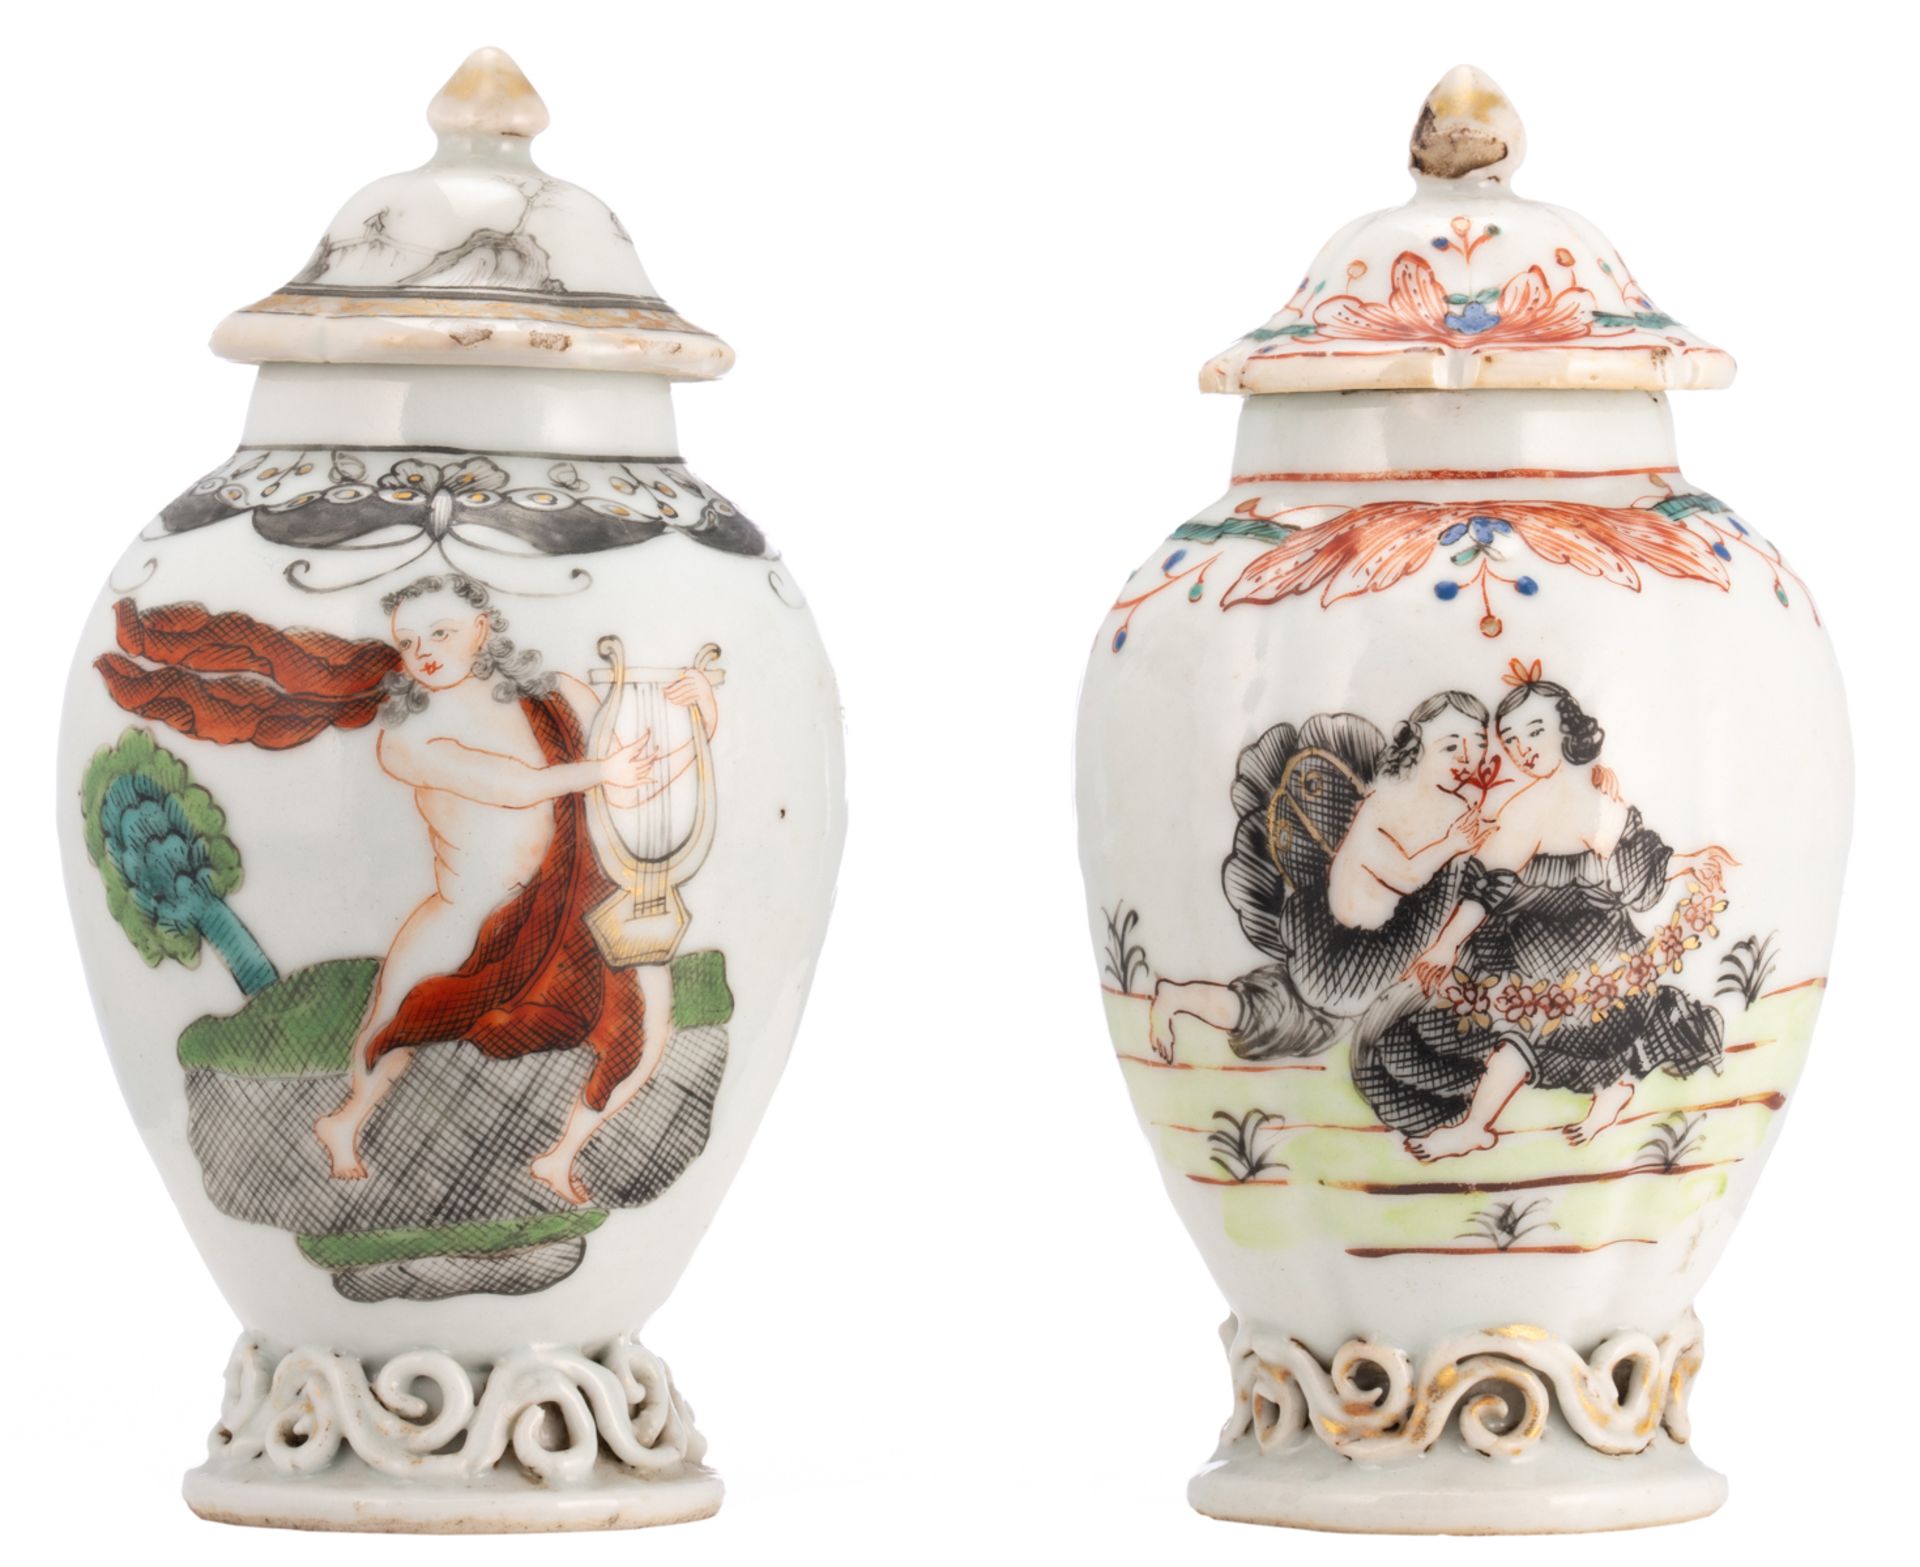 Two Chinese famille rose, grisaille and gilt export porcelain tea caddies and covers, decorated with